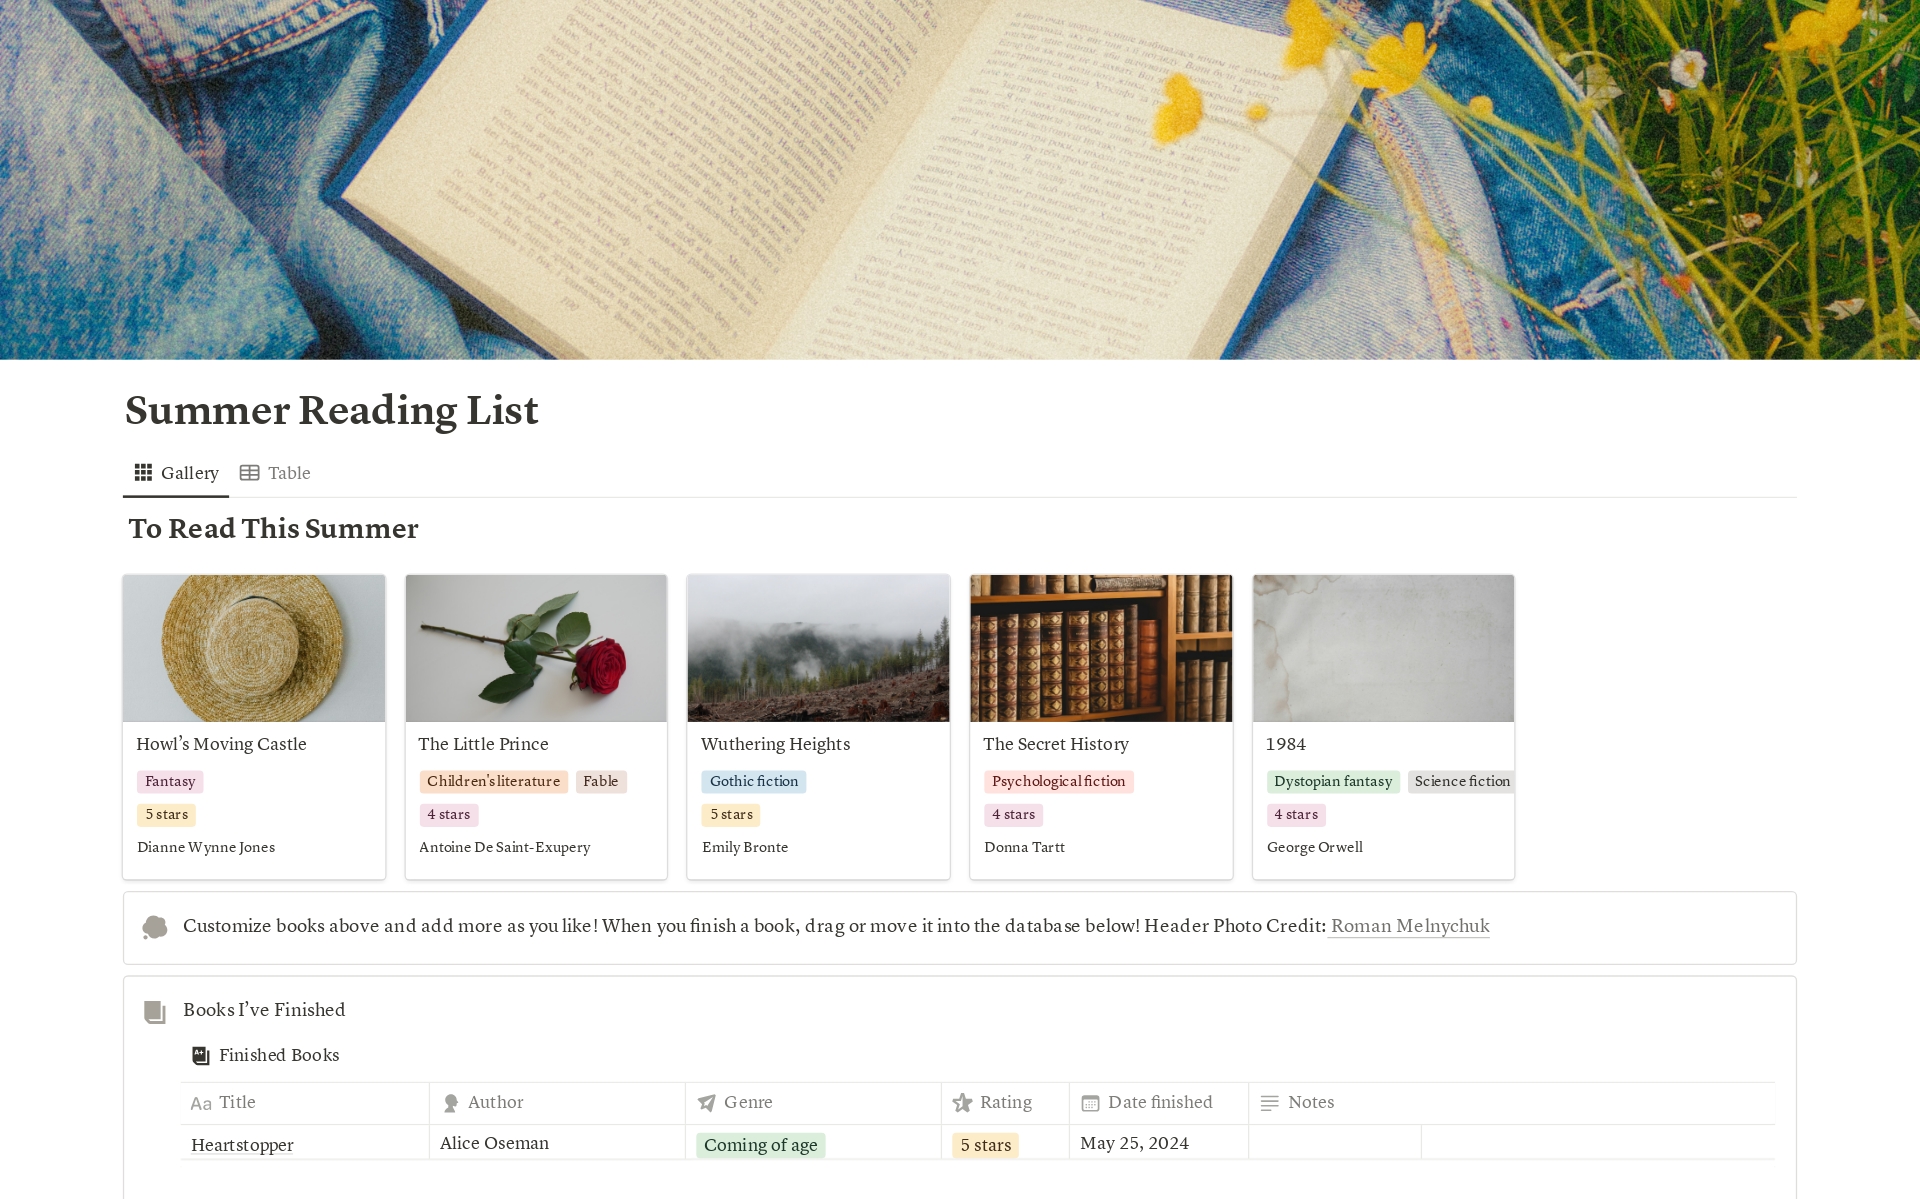 This summer reading list is perfect for organizing your summer books and keeping track of notes and thoughts for potential essays or book reports.